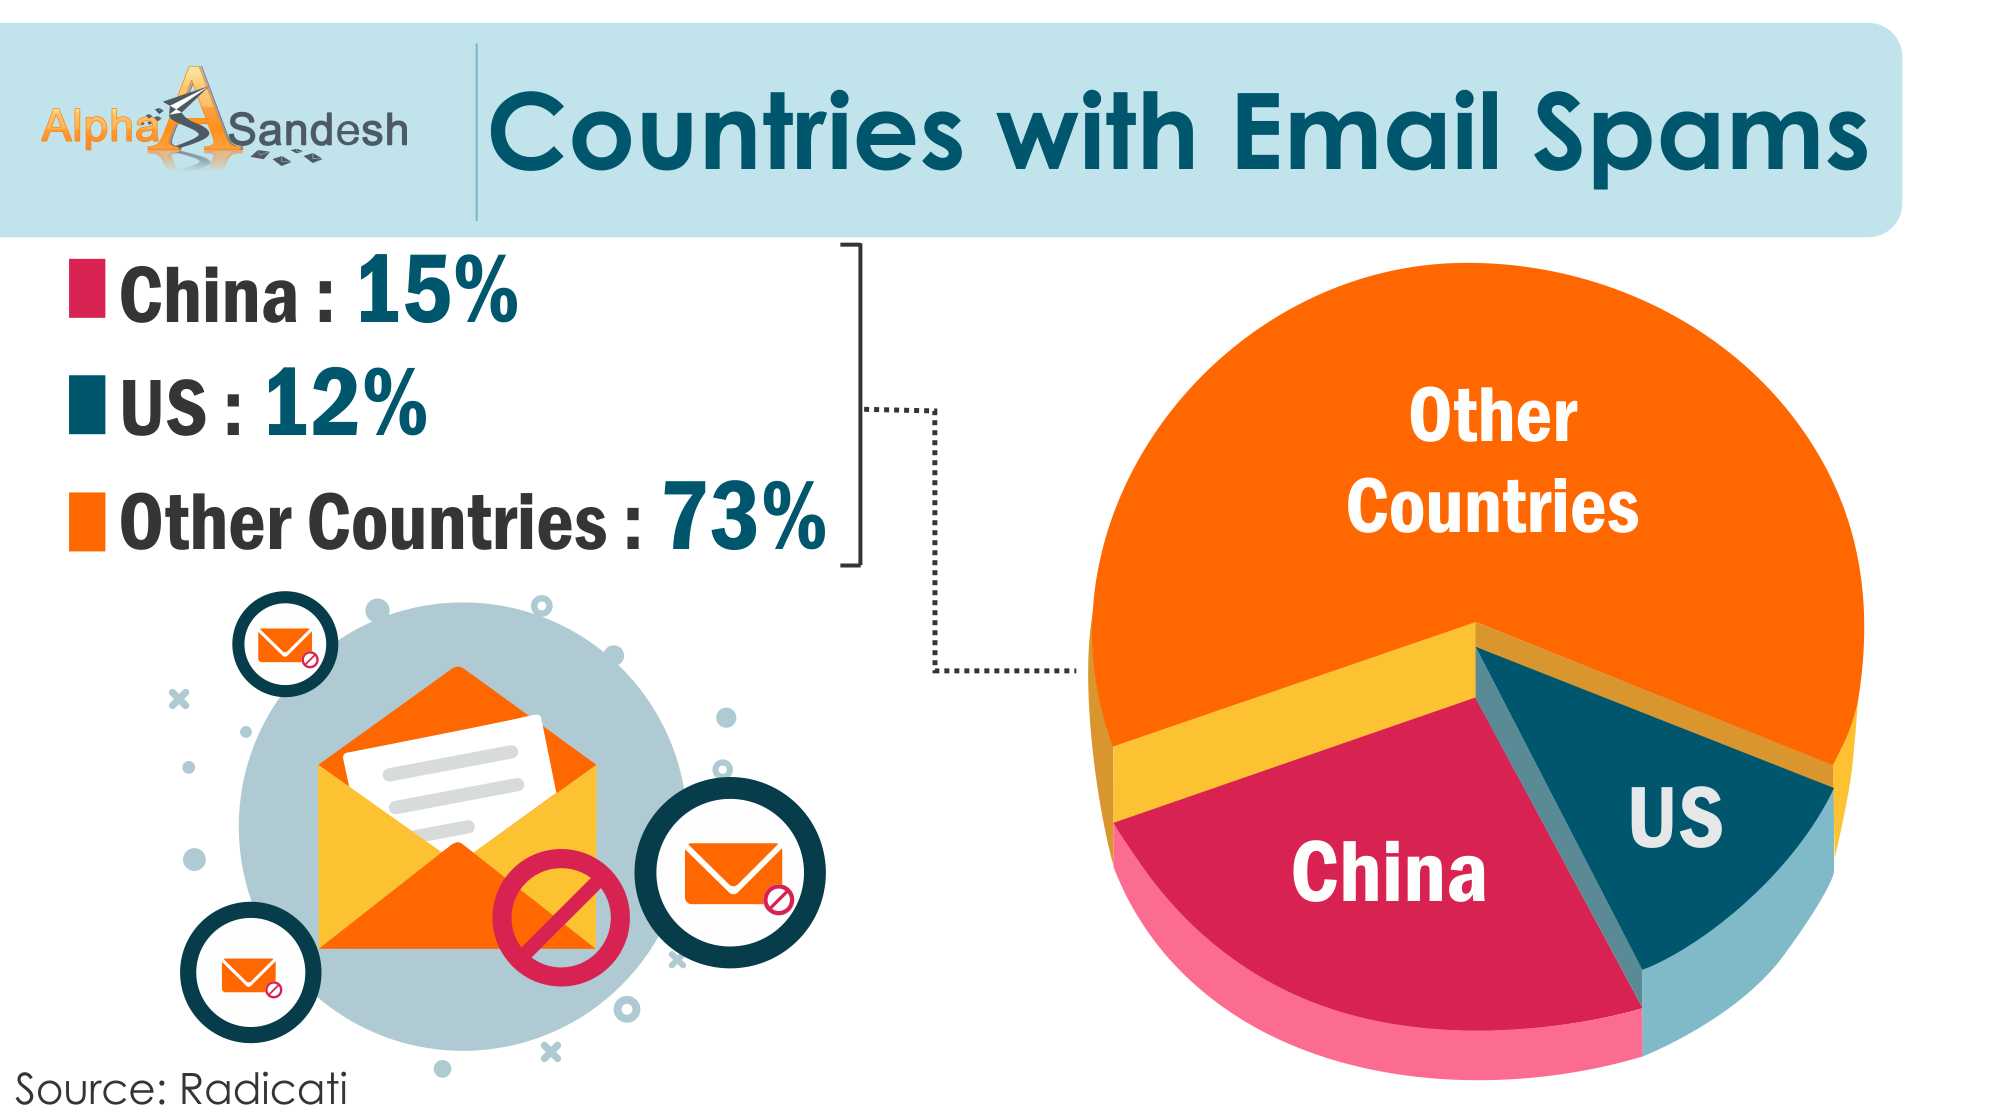 Countries with email spams - 5 Digital Marketing Trends Worth Quitting